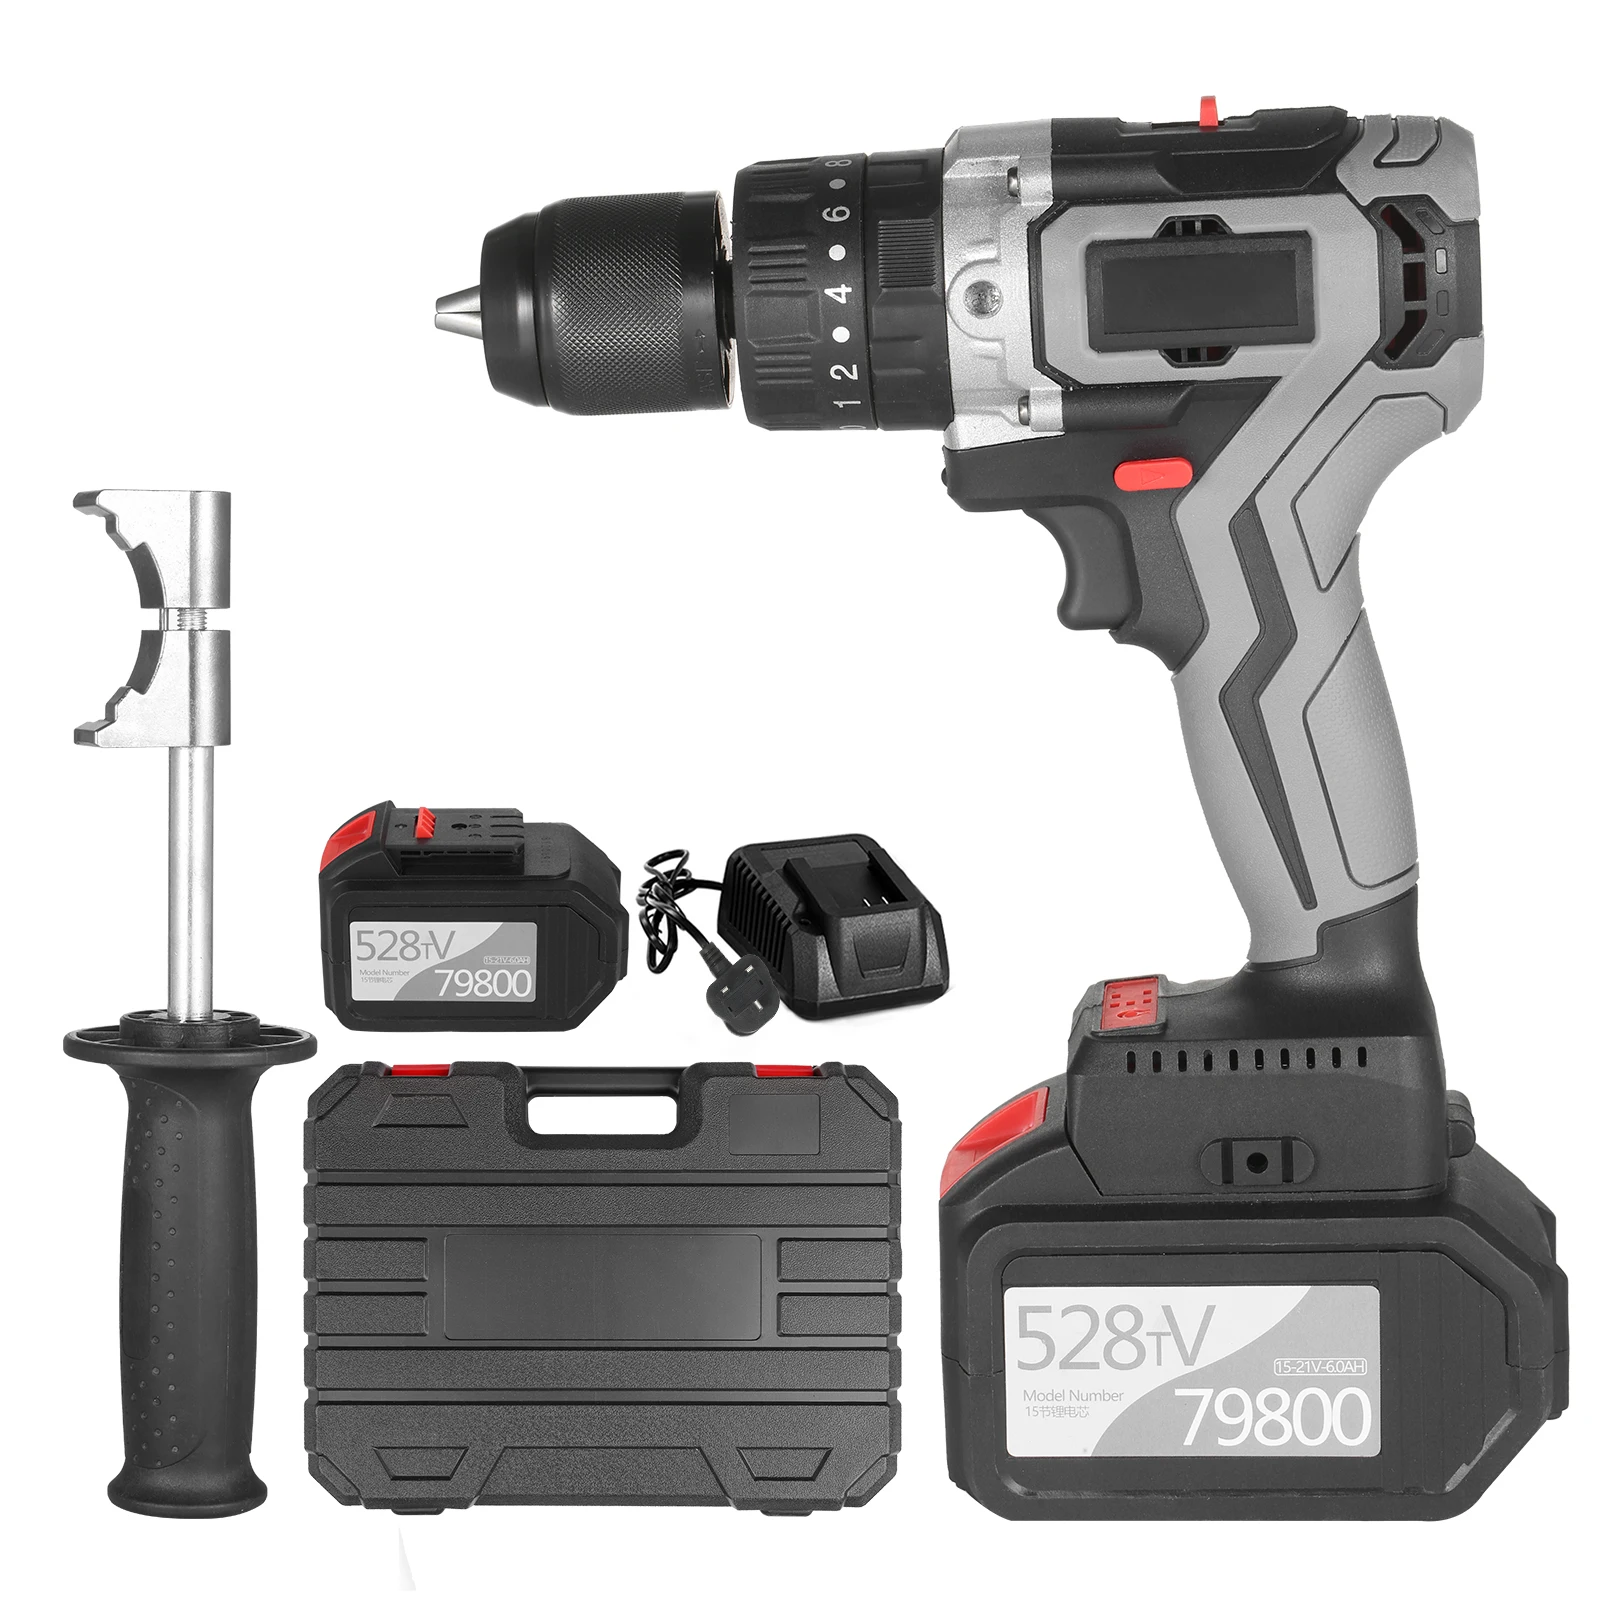 

Cordless Drill Driver Brushless Electric Drill 21V 6.0A /4.0A Battery Variable Speed Impact Hammer Drill Cordless Screwdriver